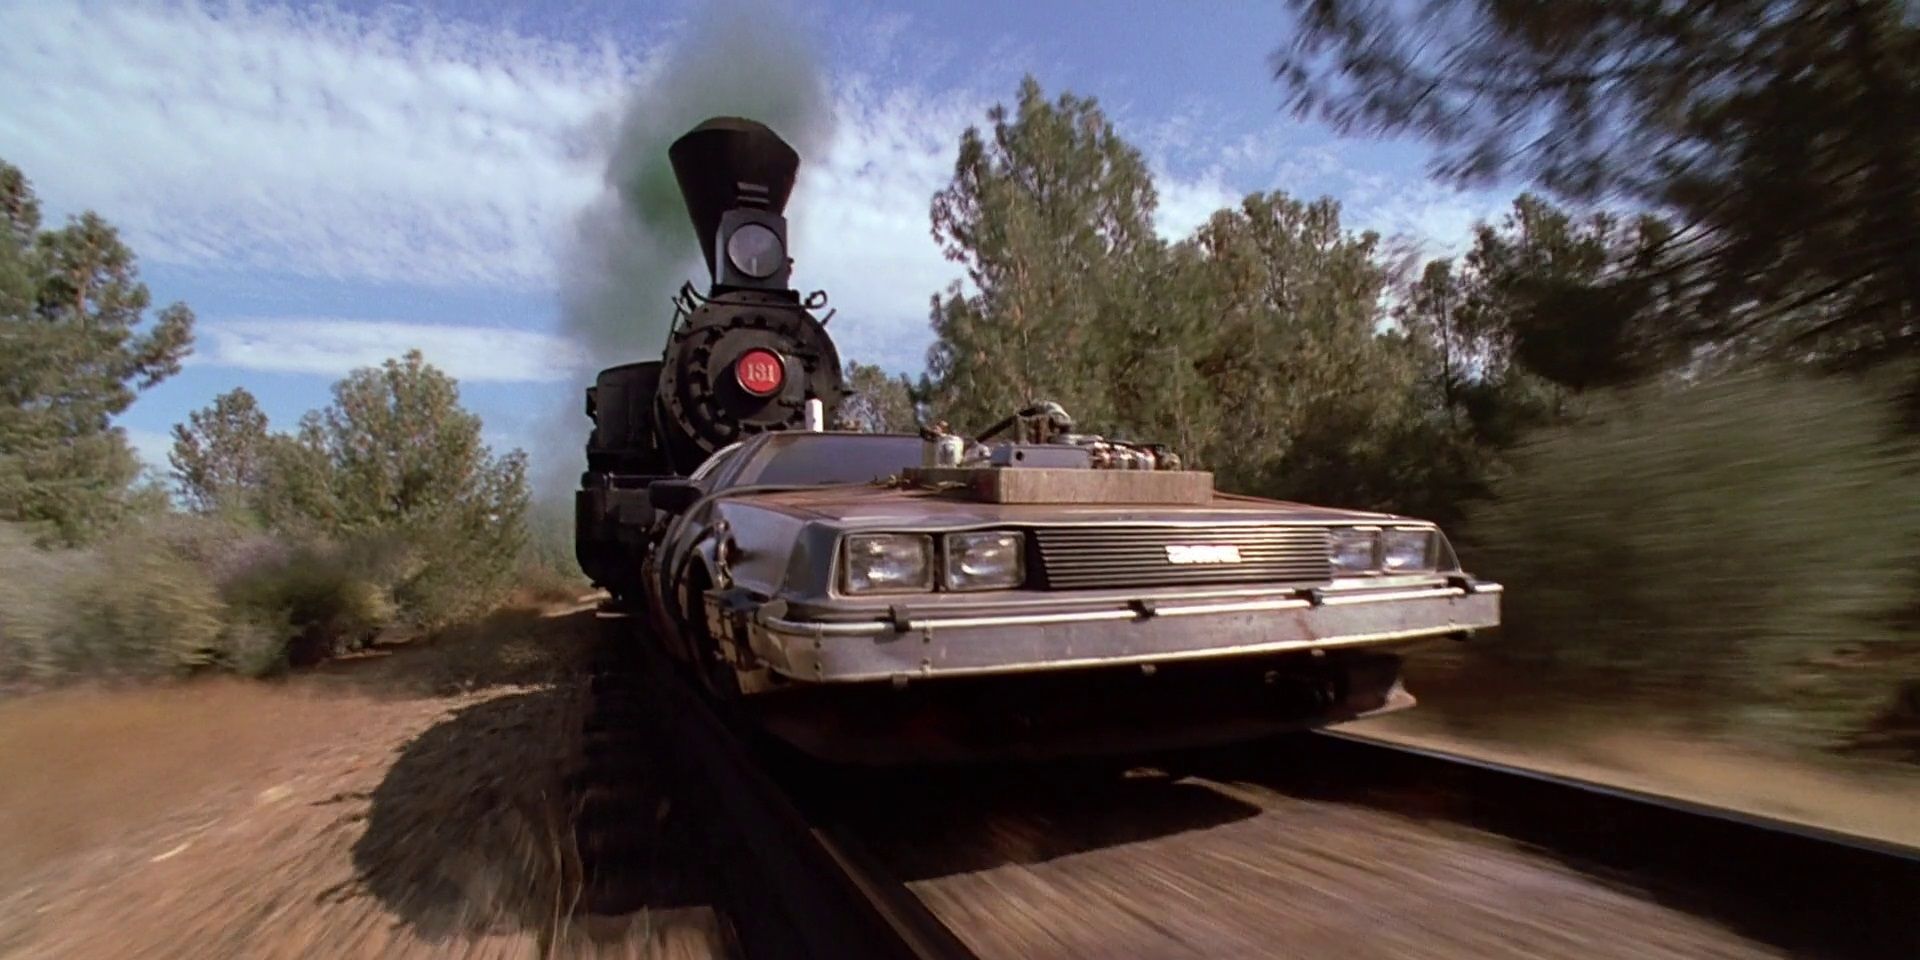 The train in Back to the Future Part II